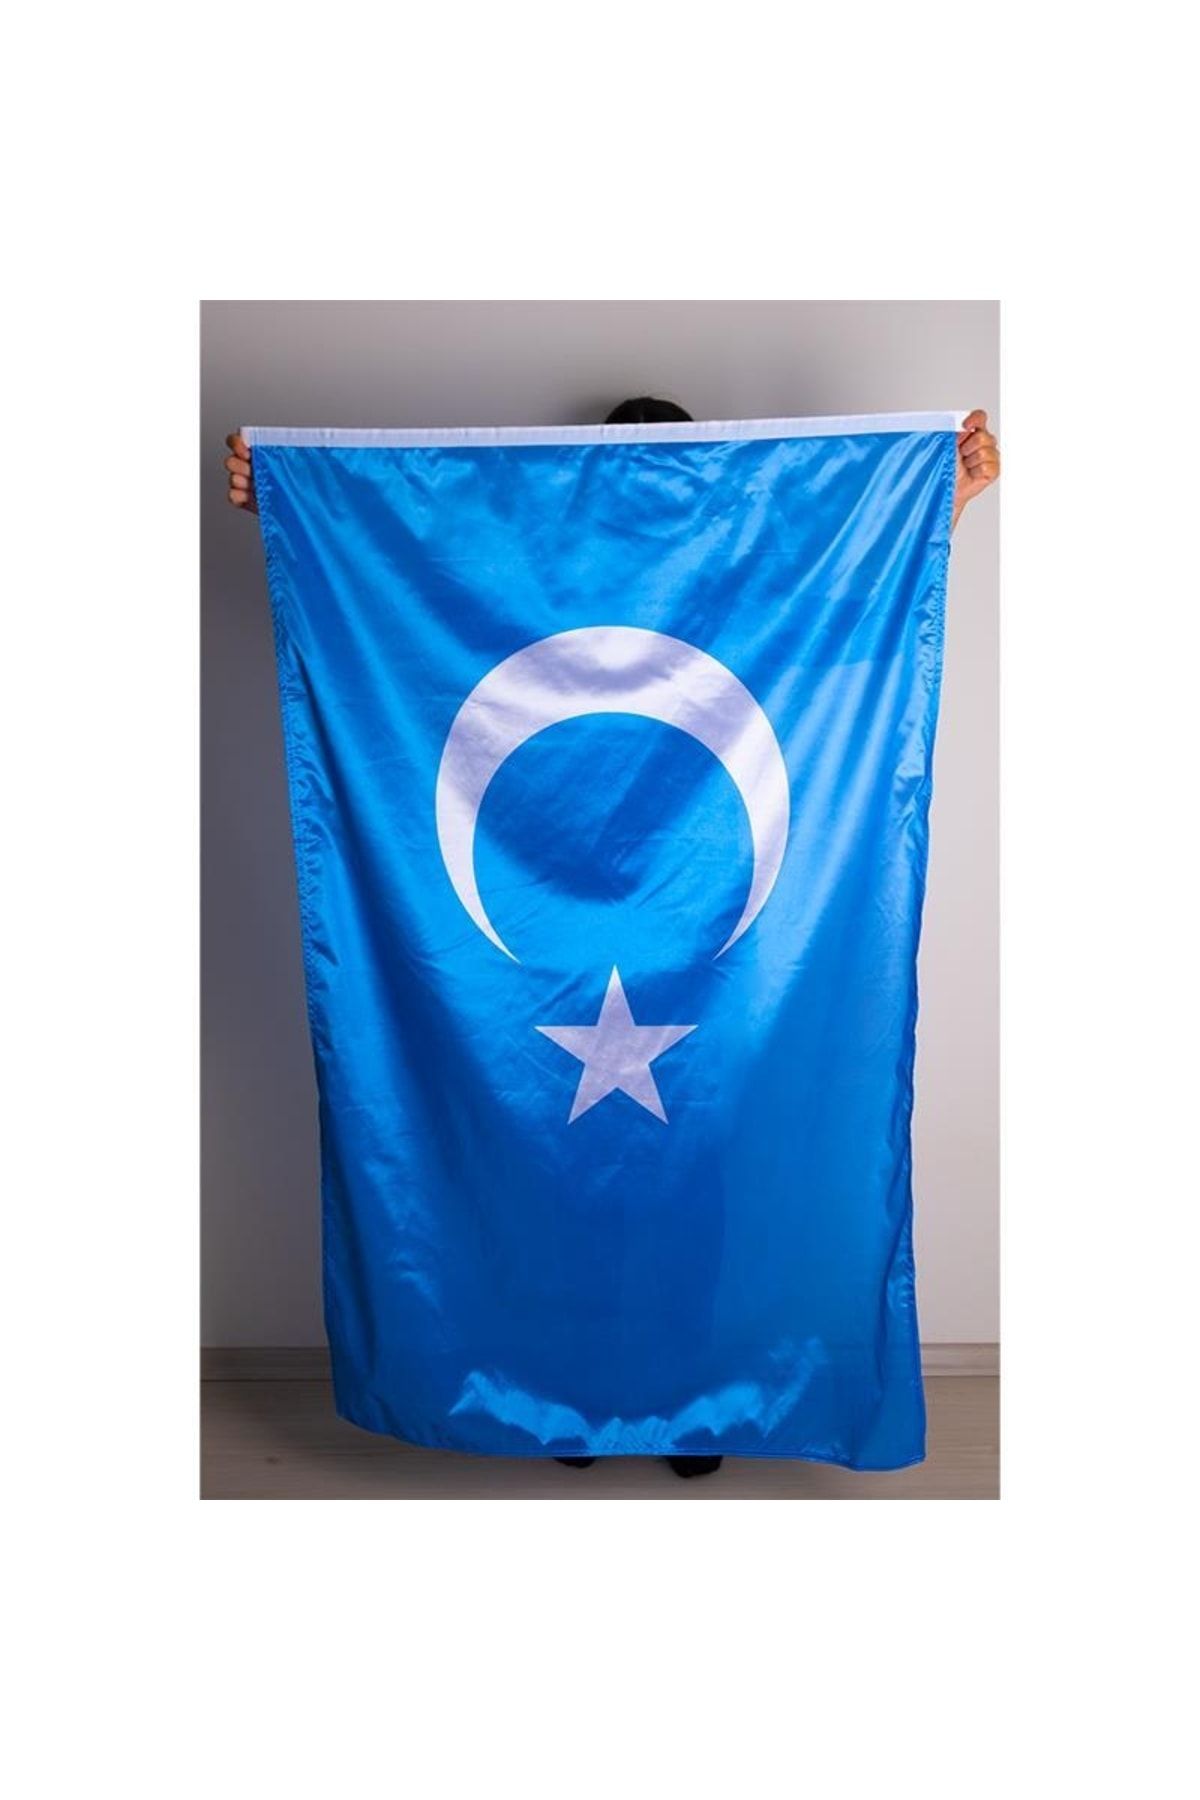 3X5FT Other Sizes Digital Printing 100d Polyester Custom Turky Turkish Flags  - China Turkish Flag and Polyester Custom Logo Flag price